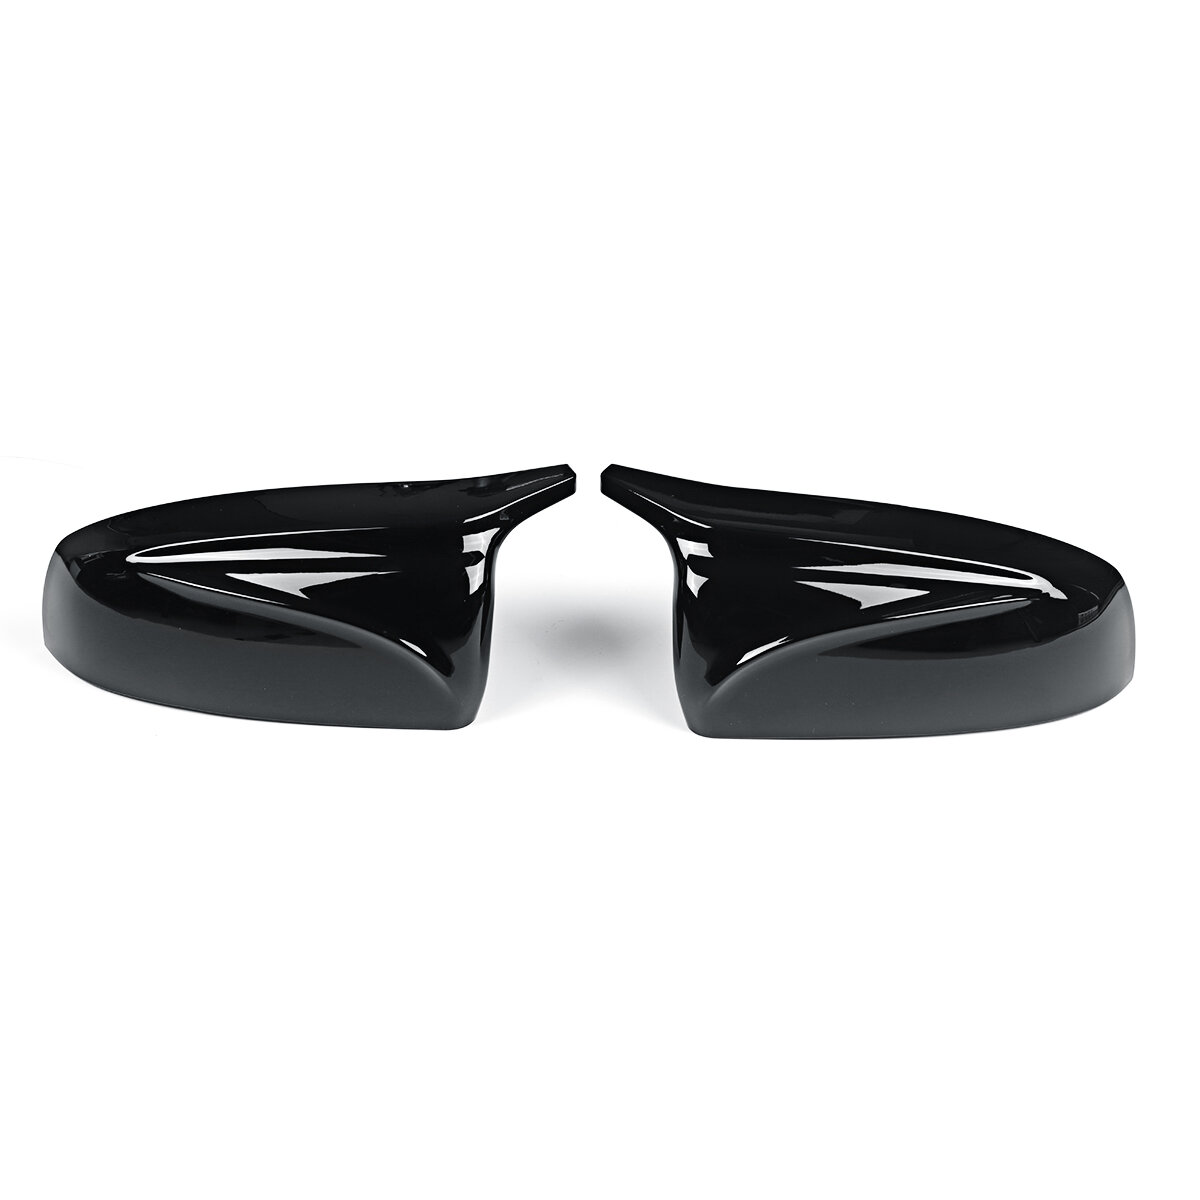 Image of Glossy Black M Style Rear View Mirror Cap Cover Replacement Pair For BMW X5 X6 E70 E71 2007-2013